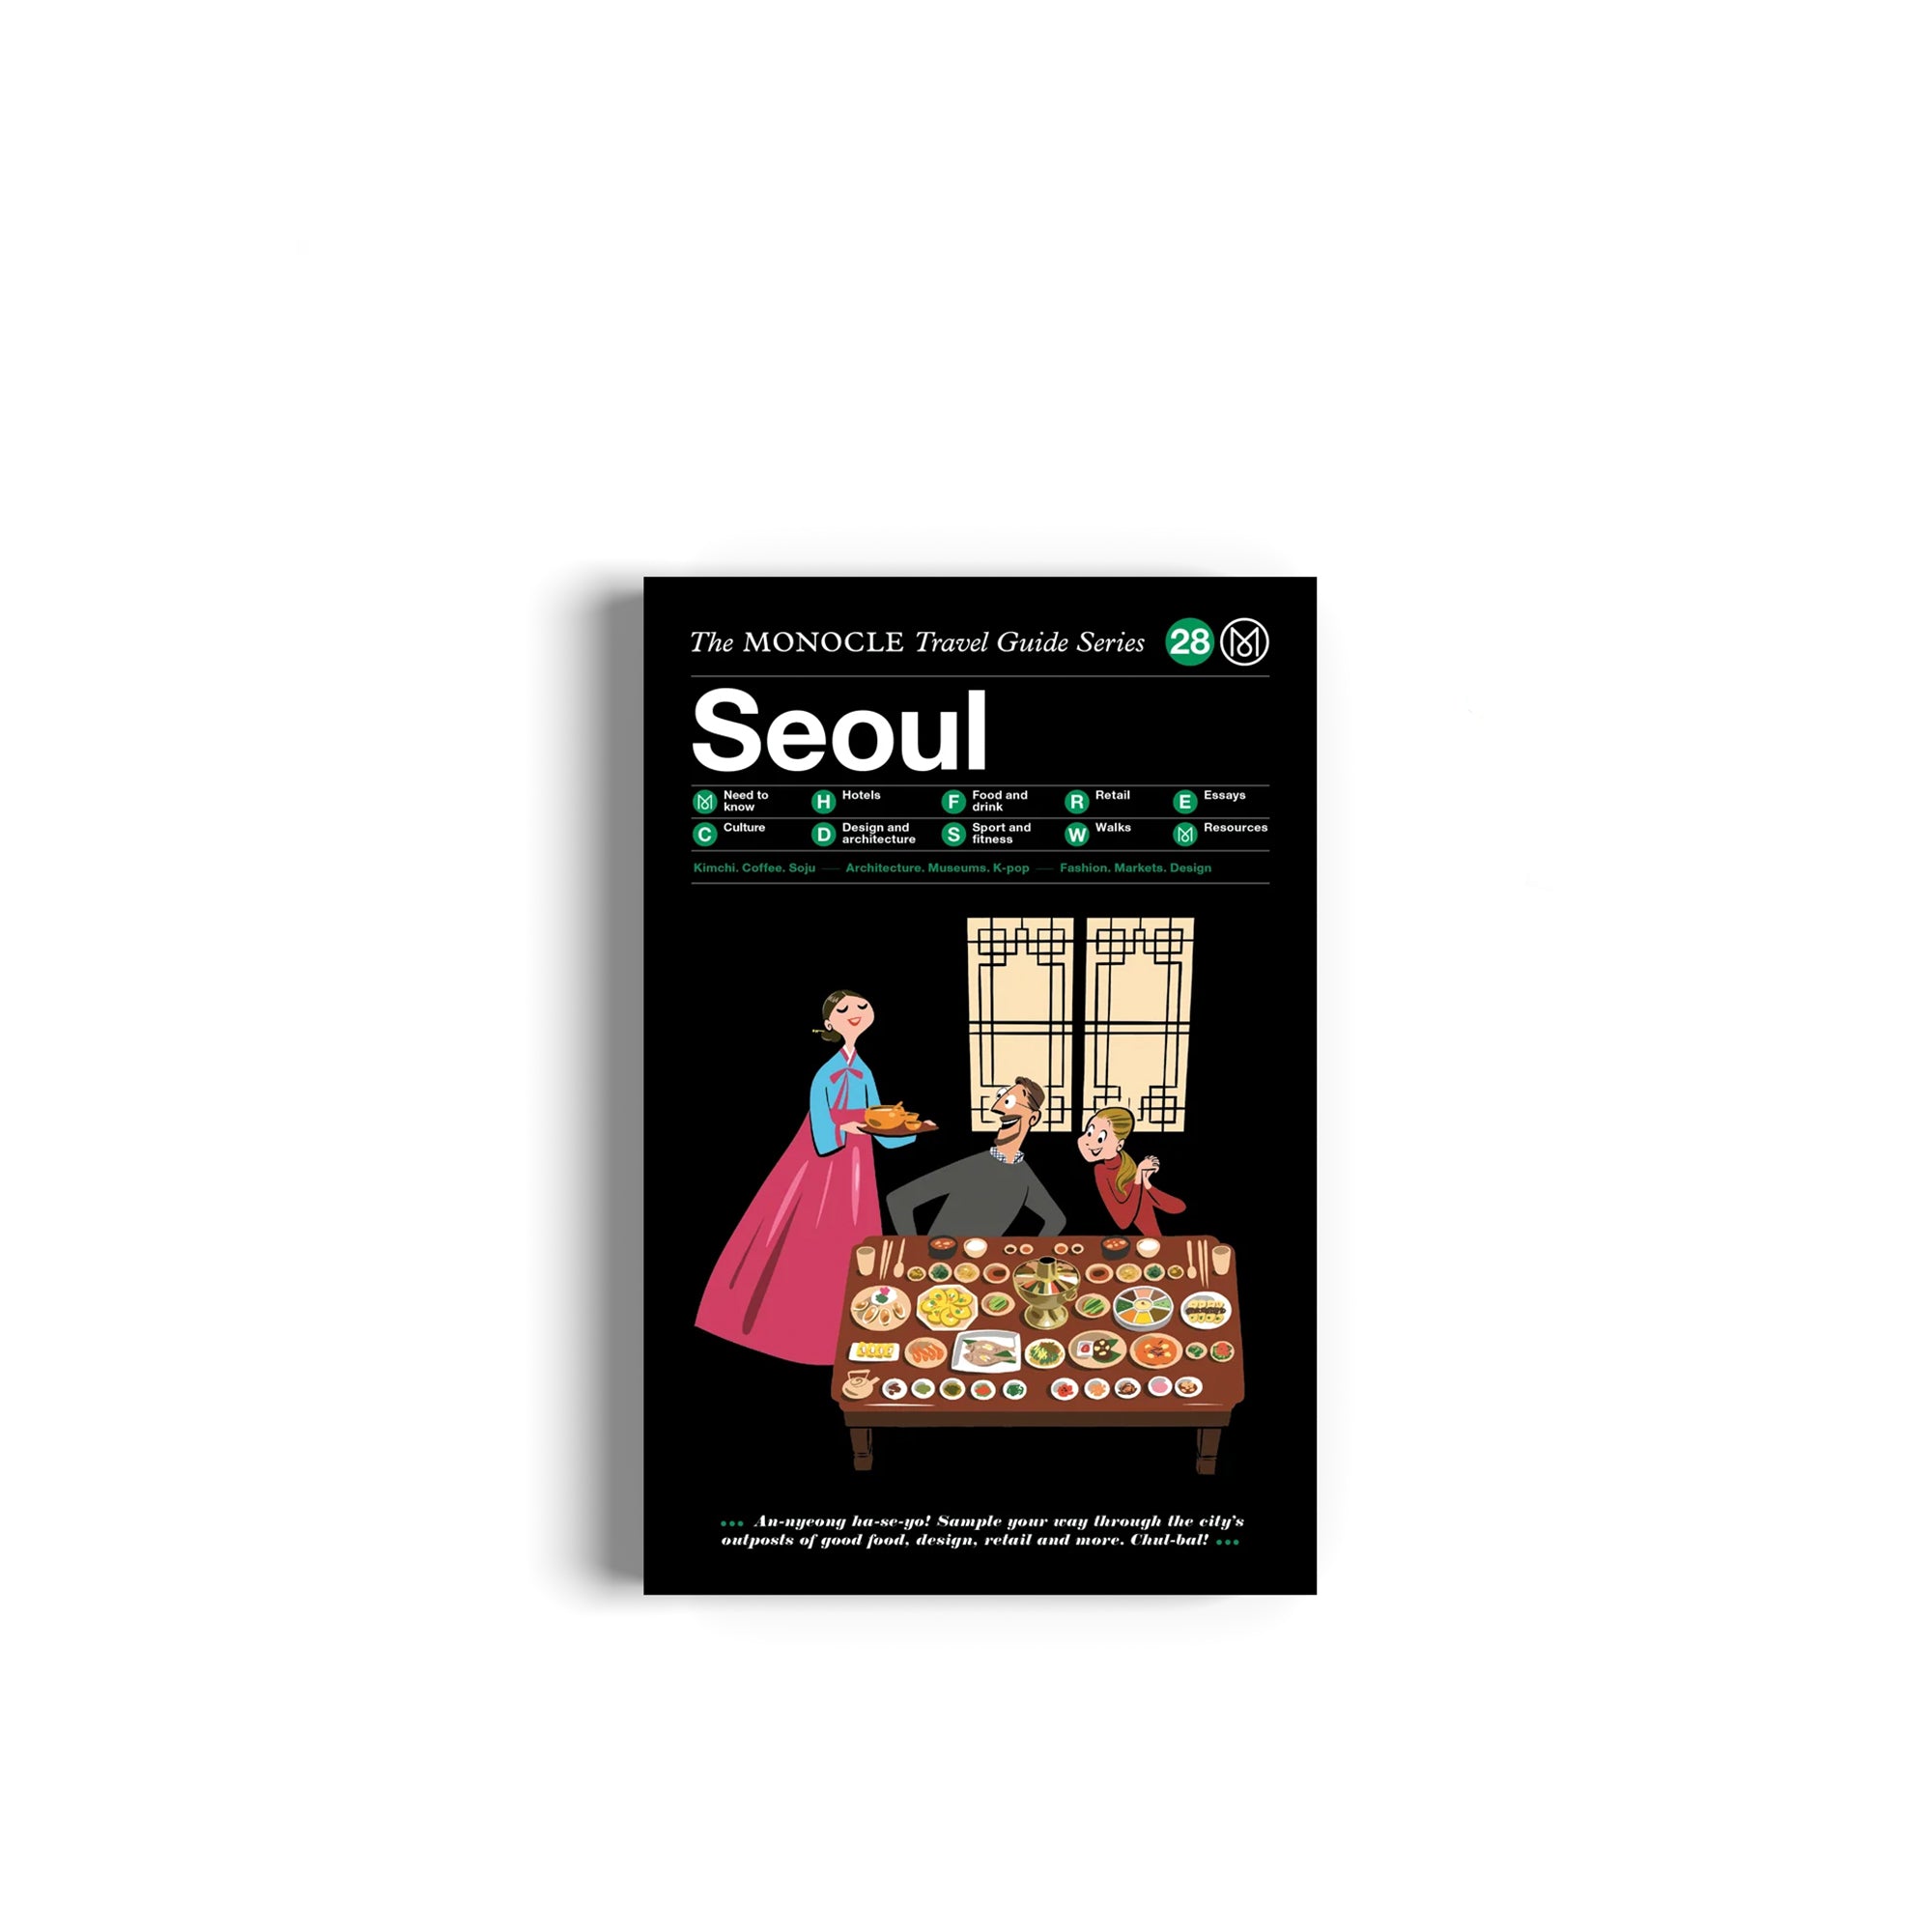 The Monocle Travel Guide Series 